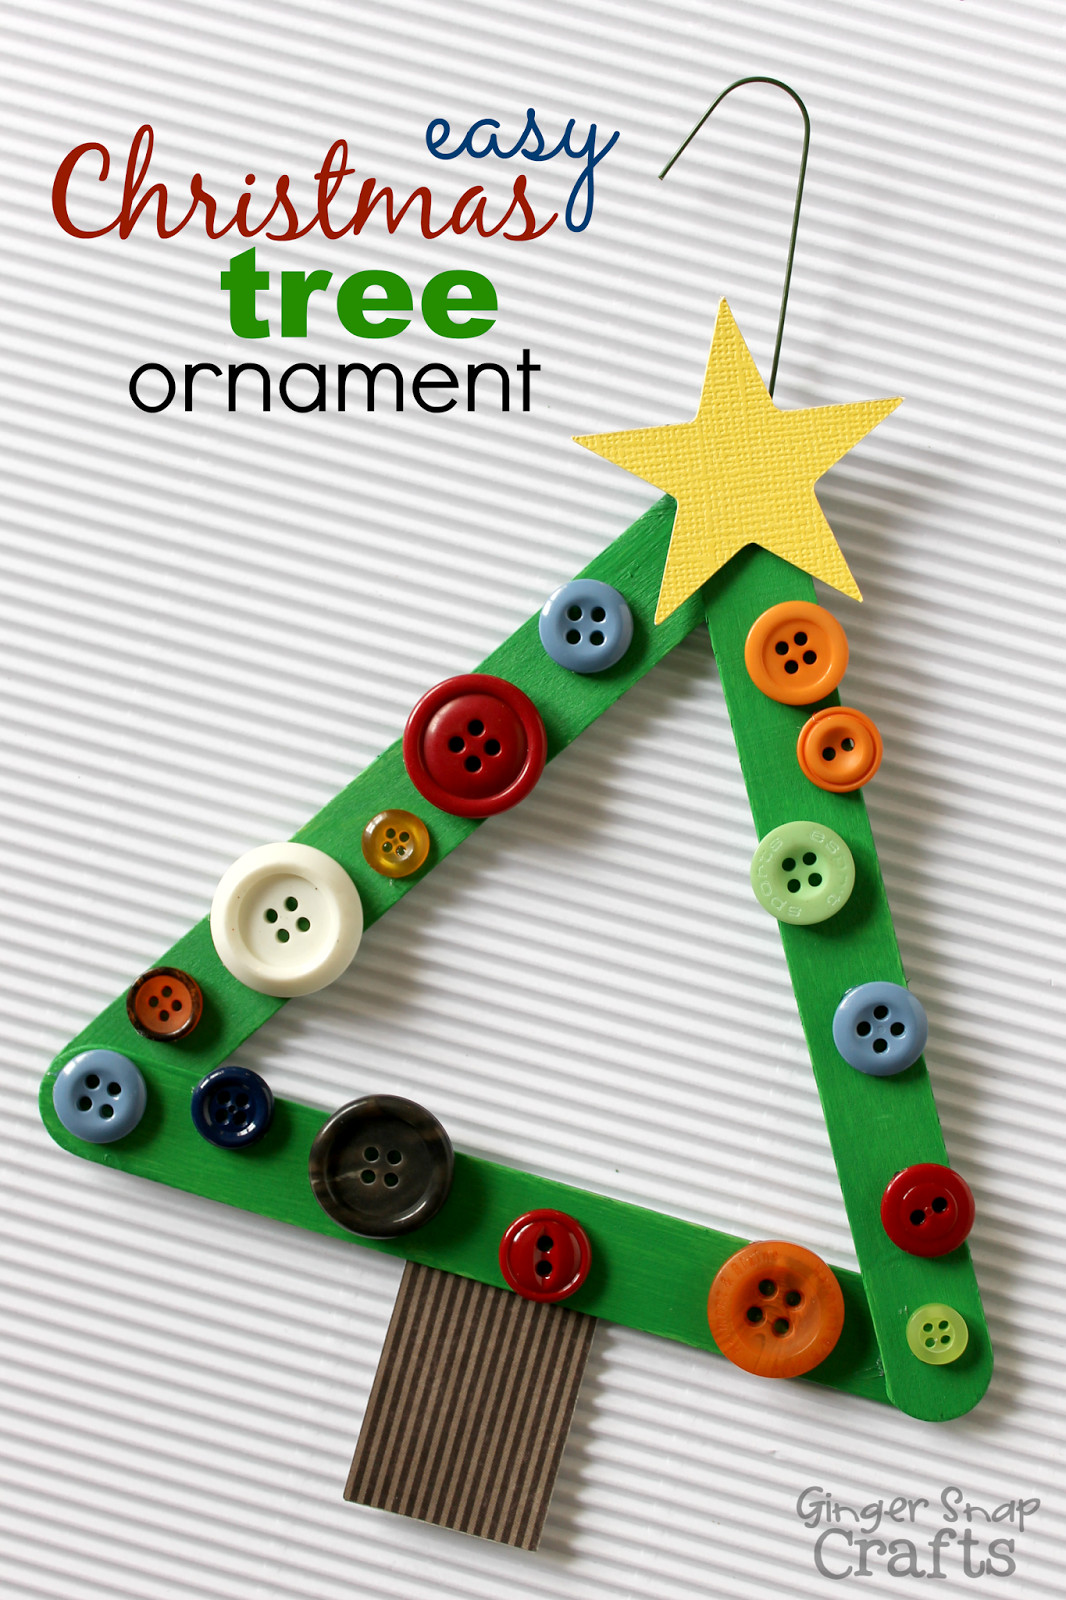 Christmas Ornament Craft Ideas
 5 Cute Ornaments You Can Make